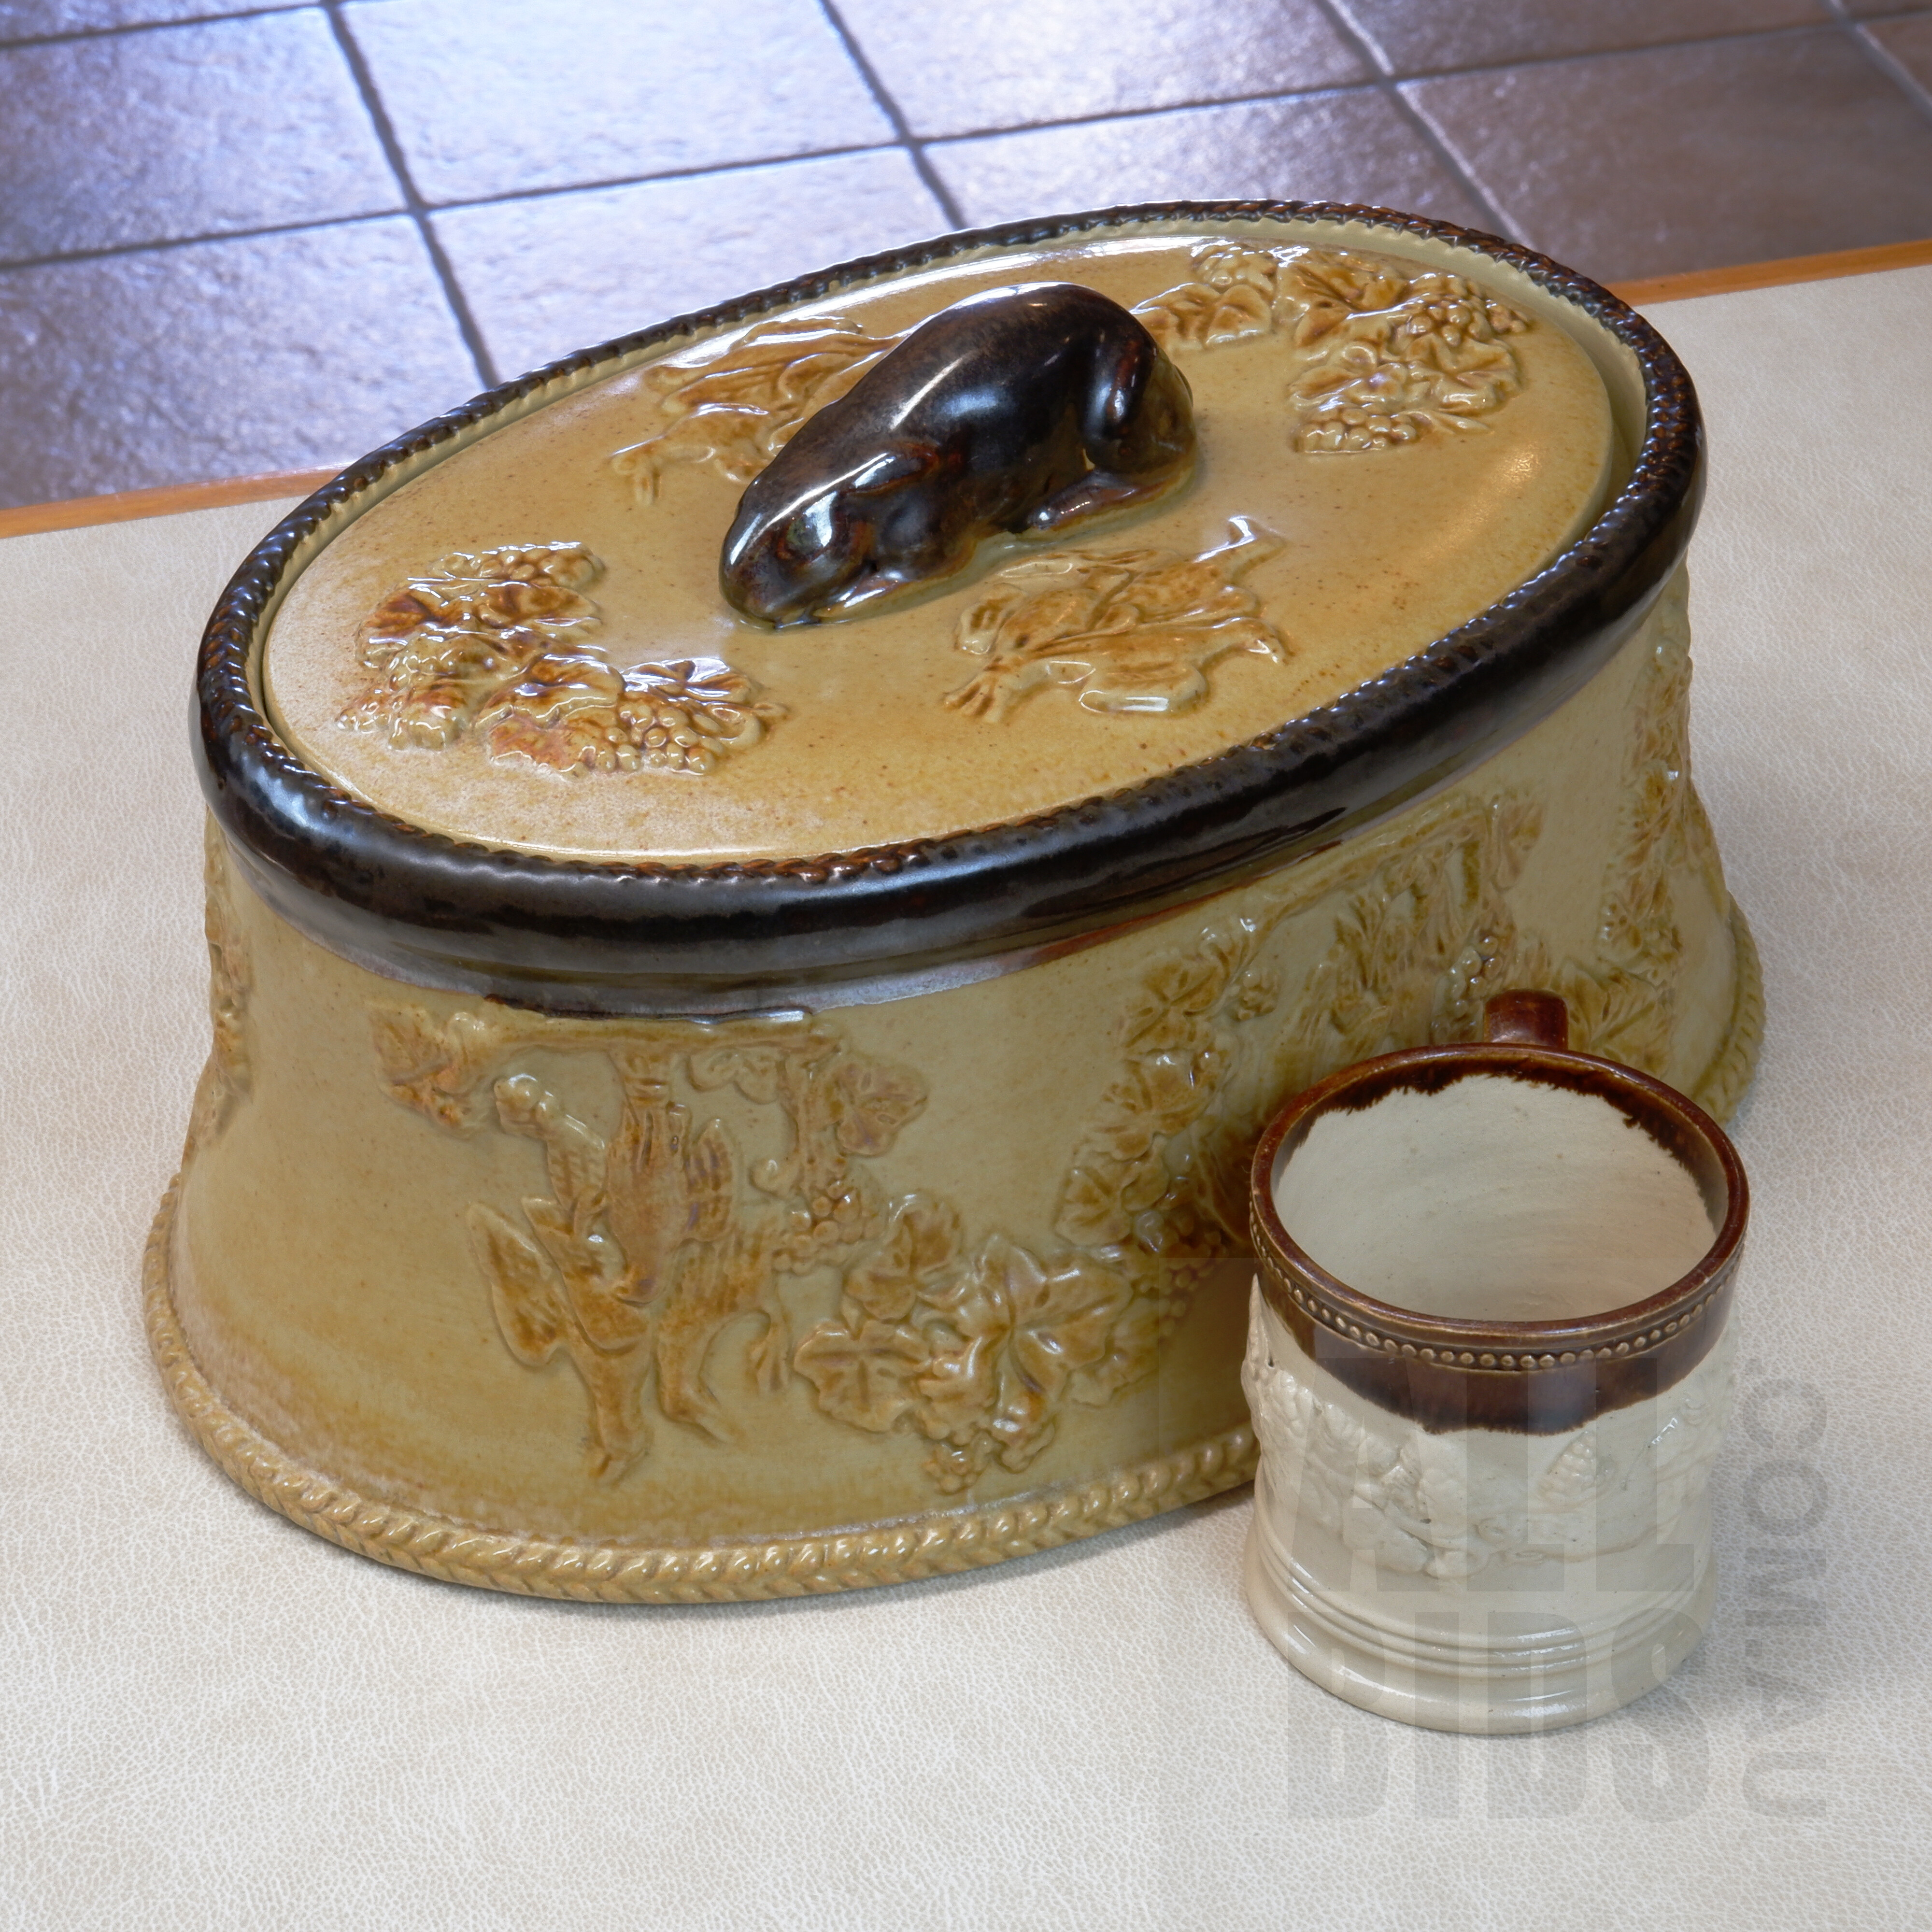 'Antique Stoneware Tureen With Rabbit Finial and Antique Stoneware Christening Cup'